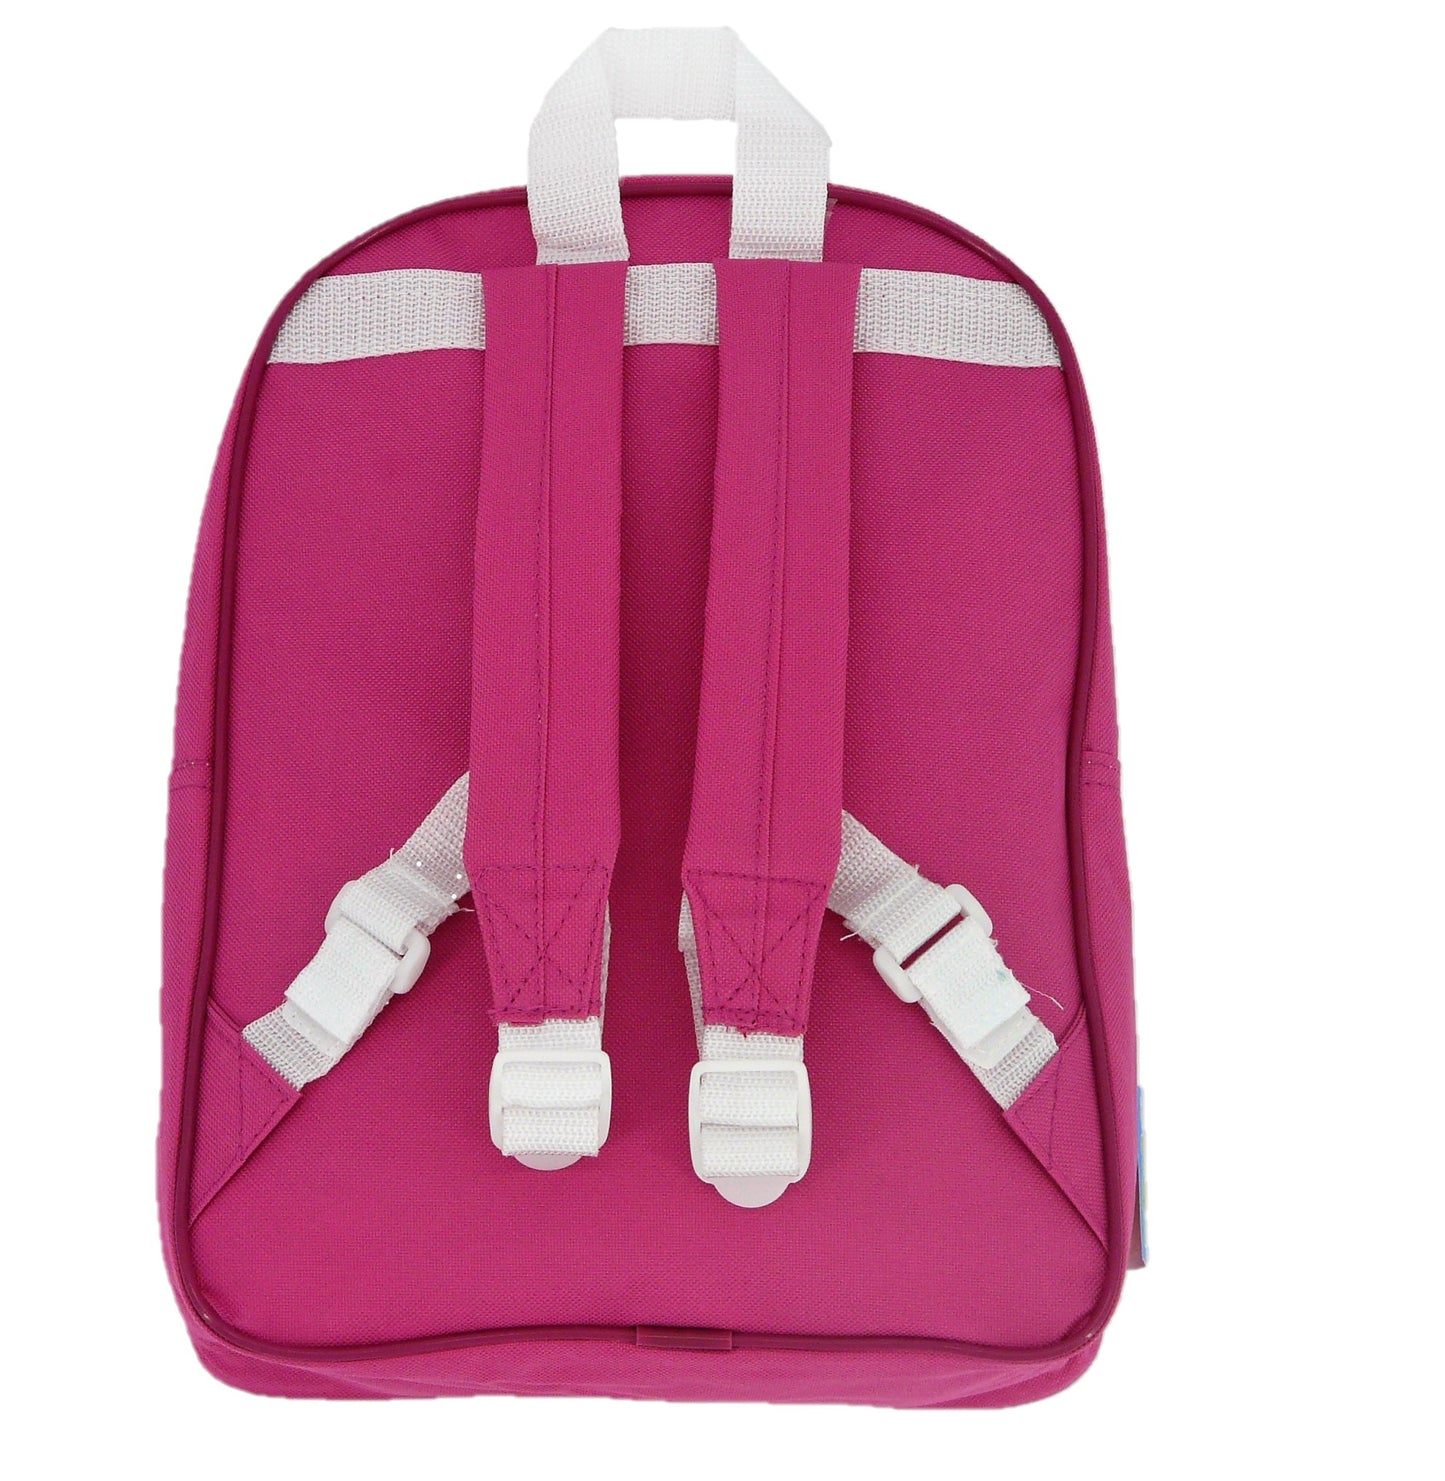 Moshi Monsters Girl's Pretty Pink Backpack Poppet